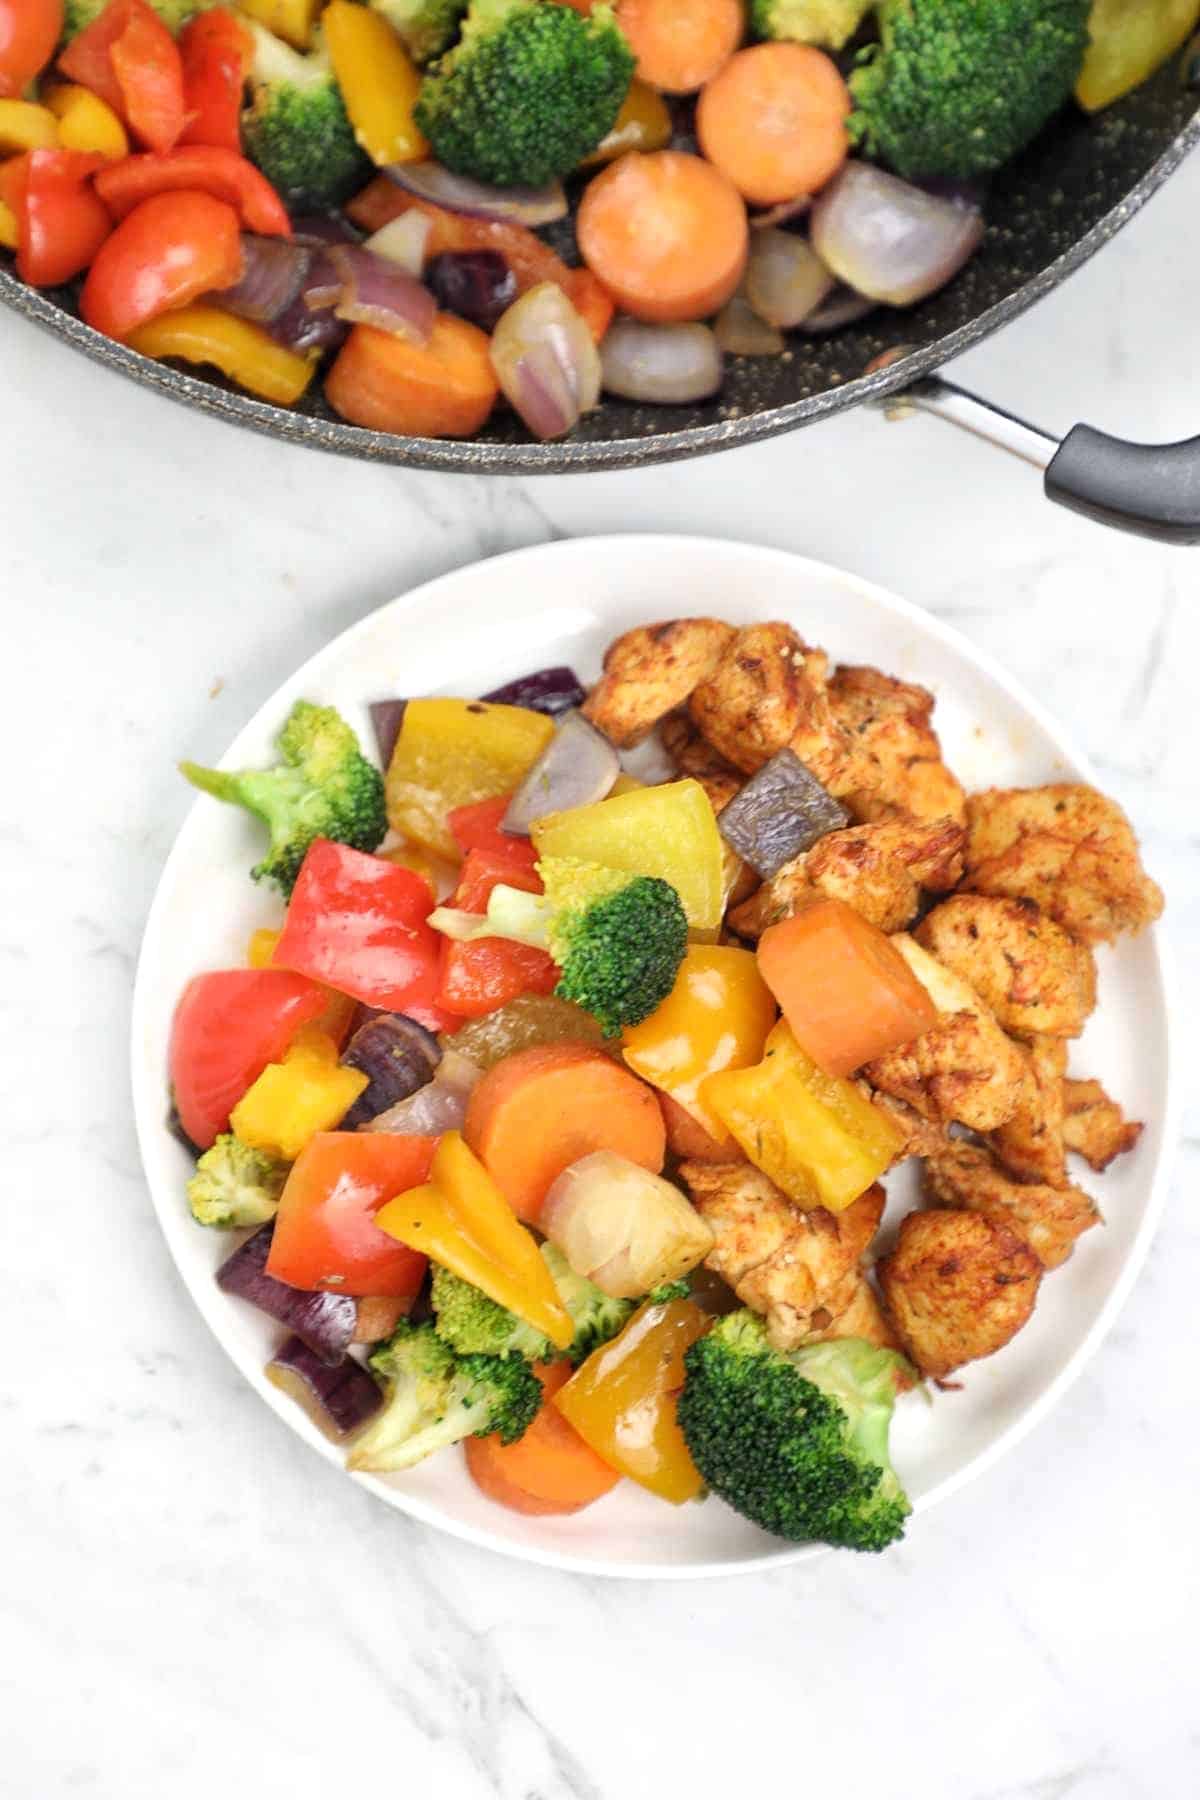 pan fried vegetables served with chicken.